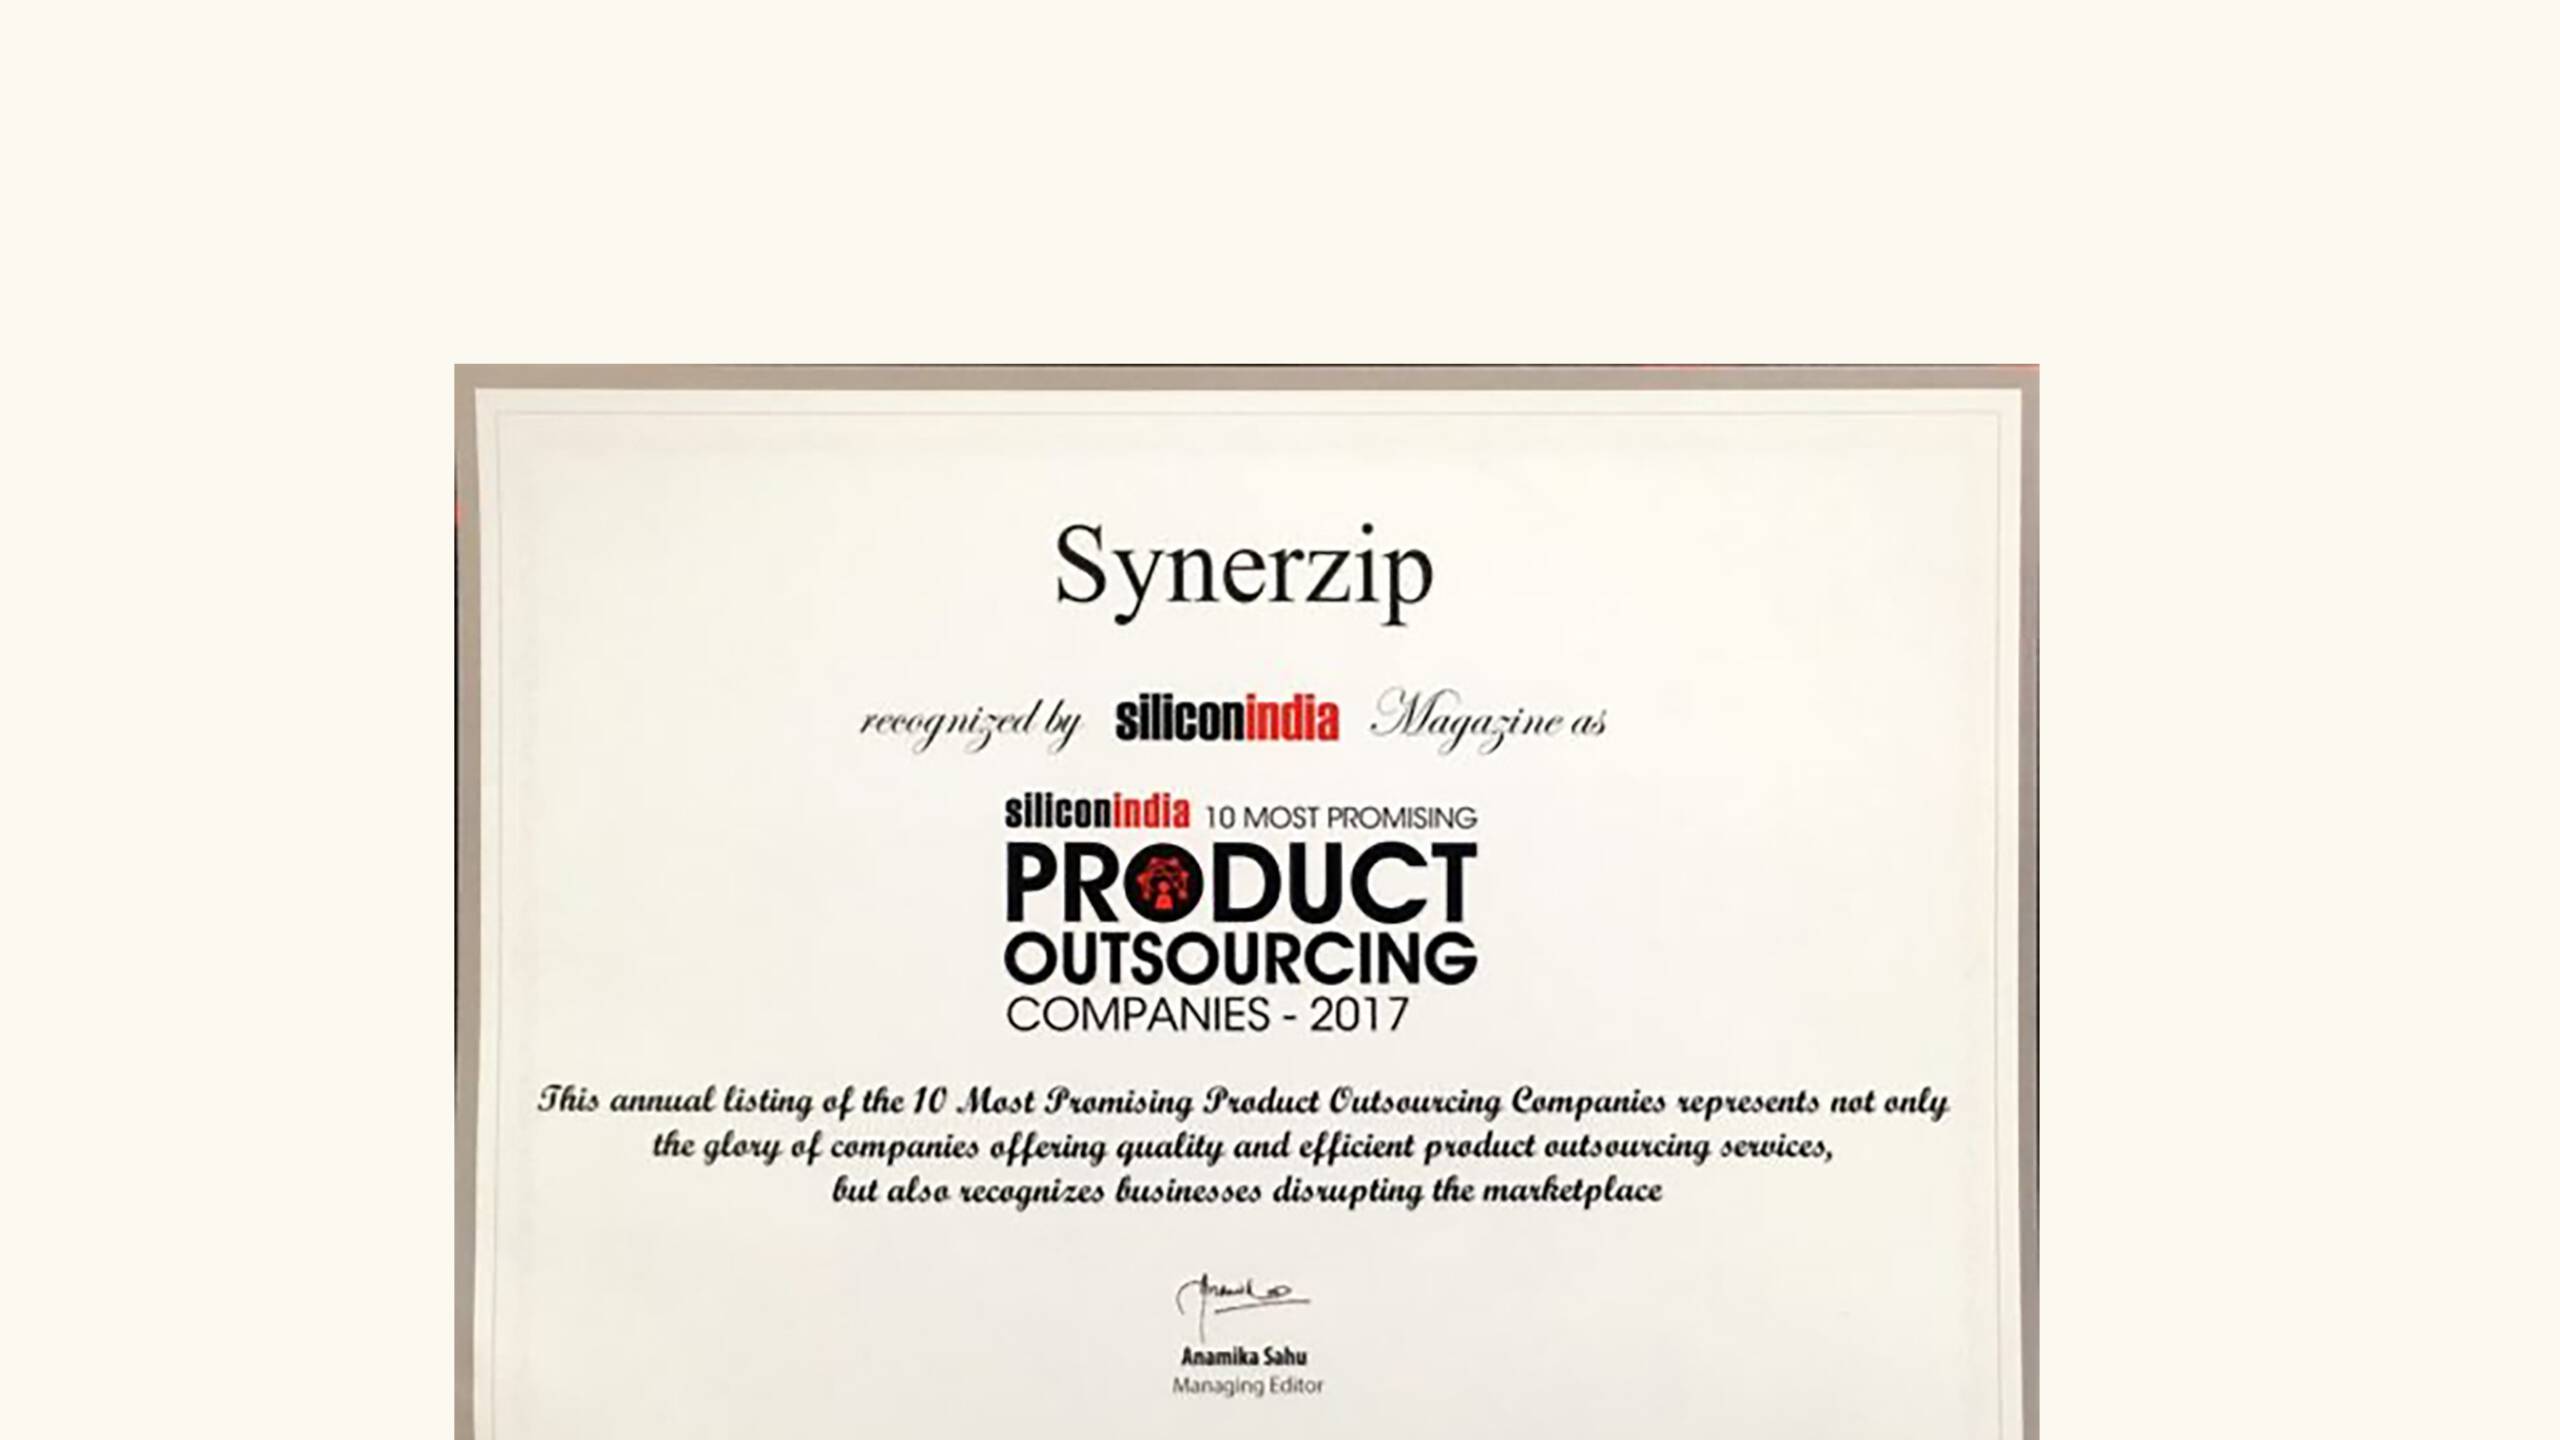 Synerzip on Top 10 Promising Product Outsourcing Companies 2017 List by SiliconIndia